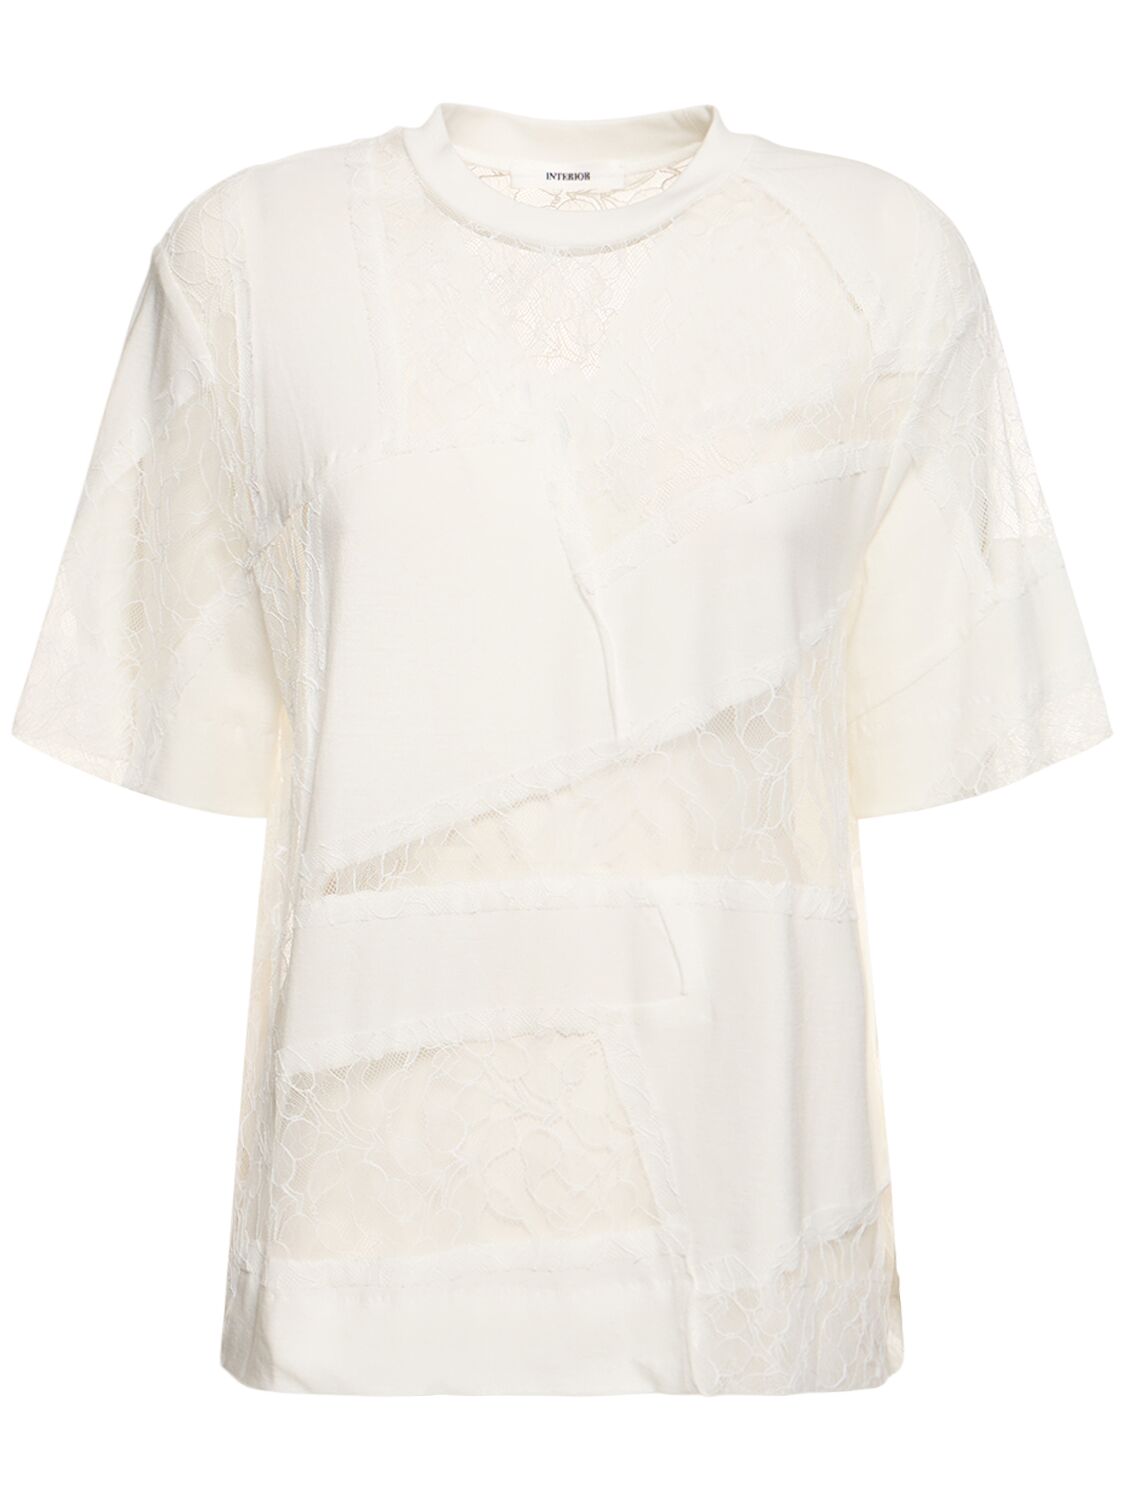 Image of The Carson Cotton Lace Top